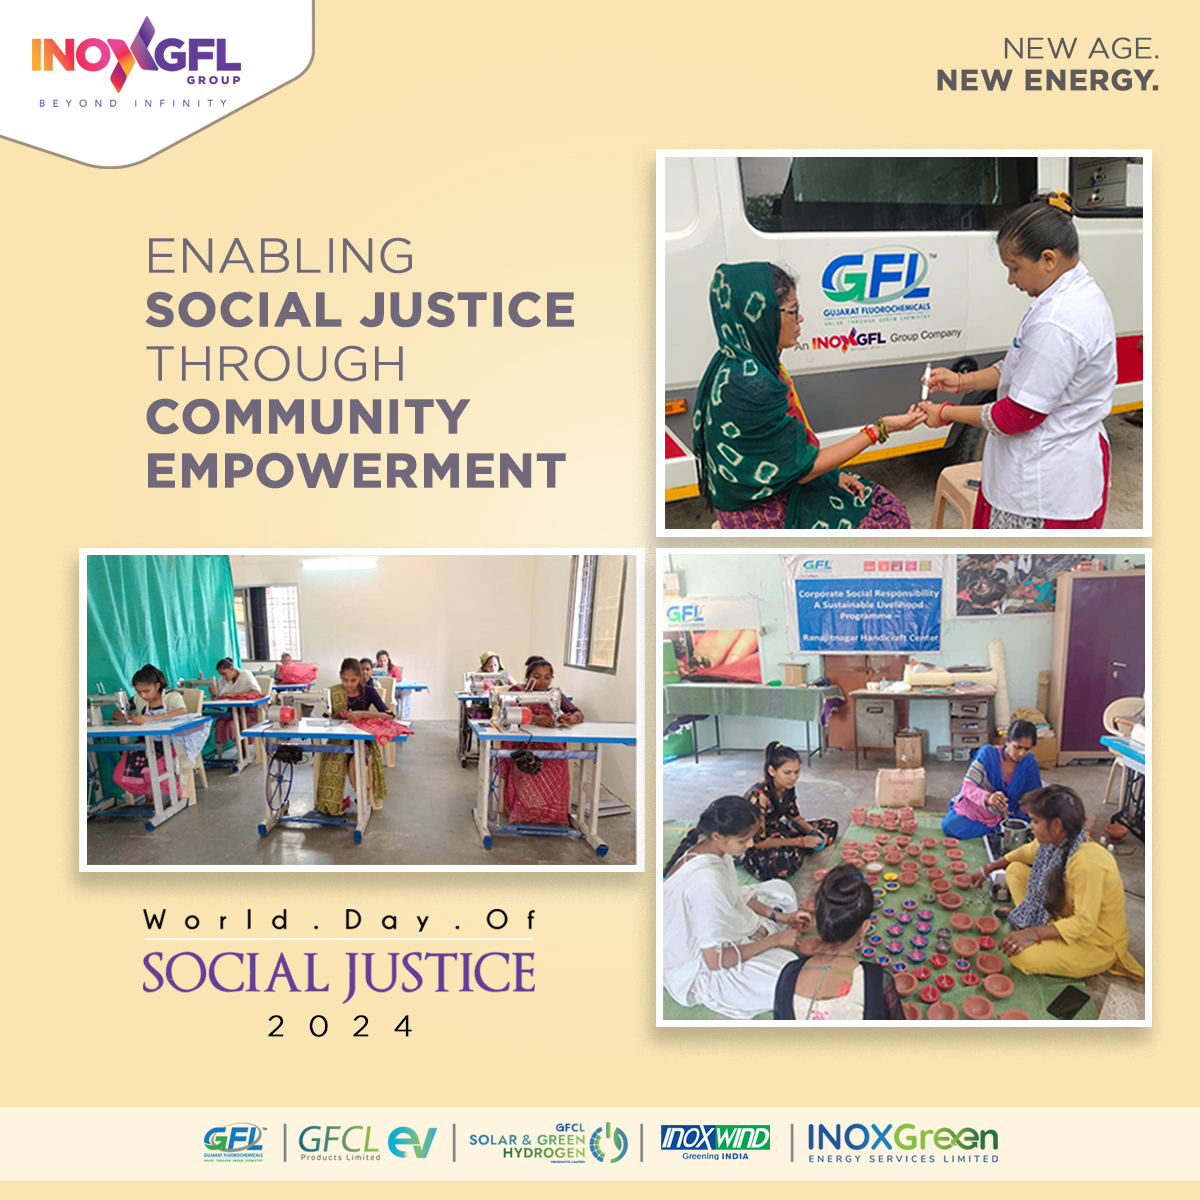 On World Day of Social Justice, our commitment to fostering positive change through community empowerment remains unwavering. Together, let's build a future where everyone has equal opportunities and rights.

#inoxgfl #gfl #inoxwind #inoxgreen #socialjustice #equality…